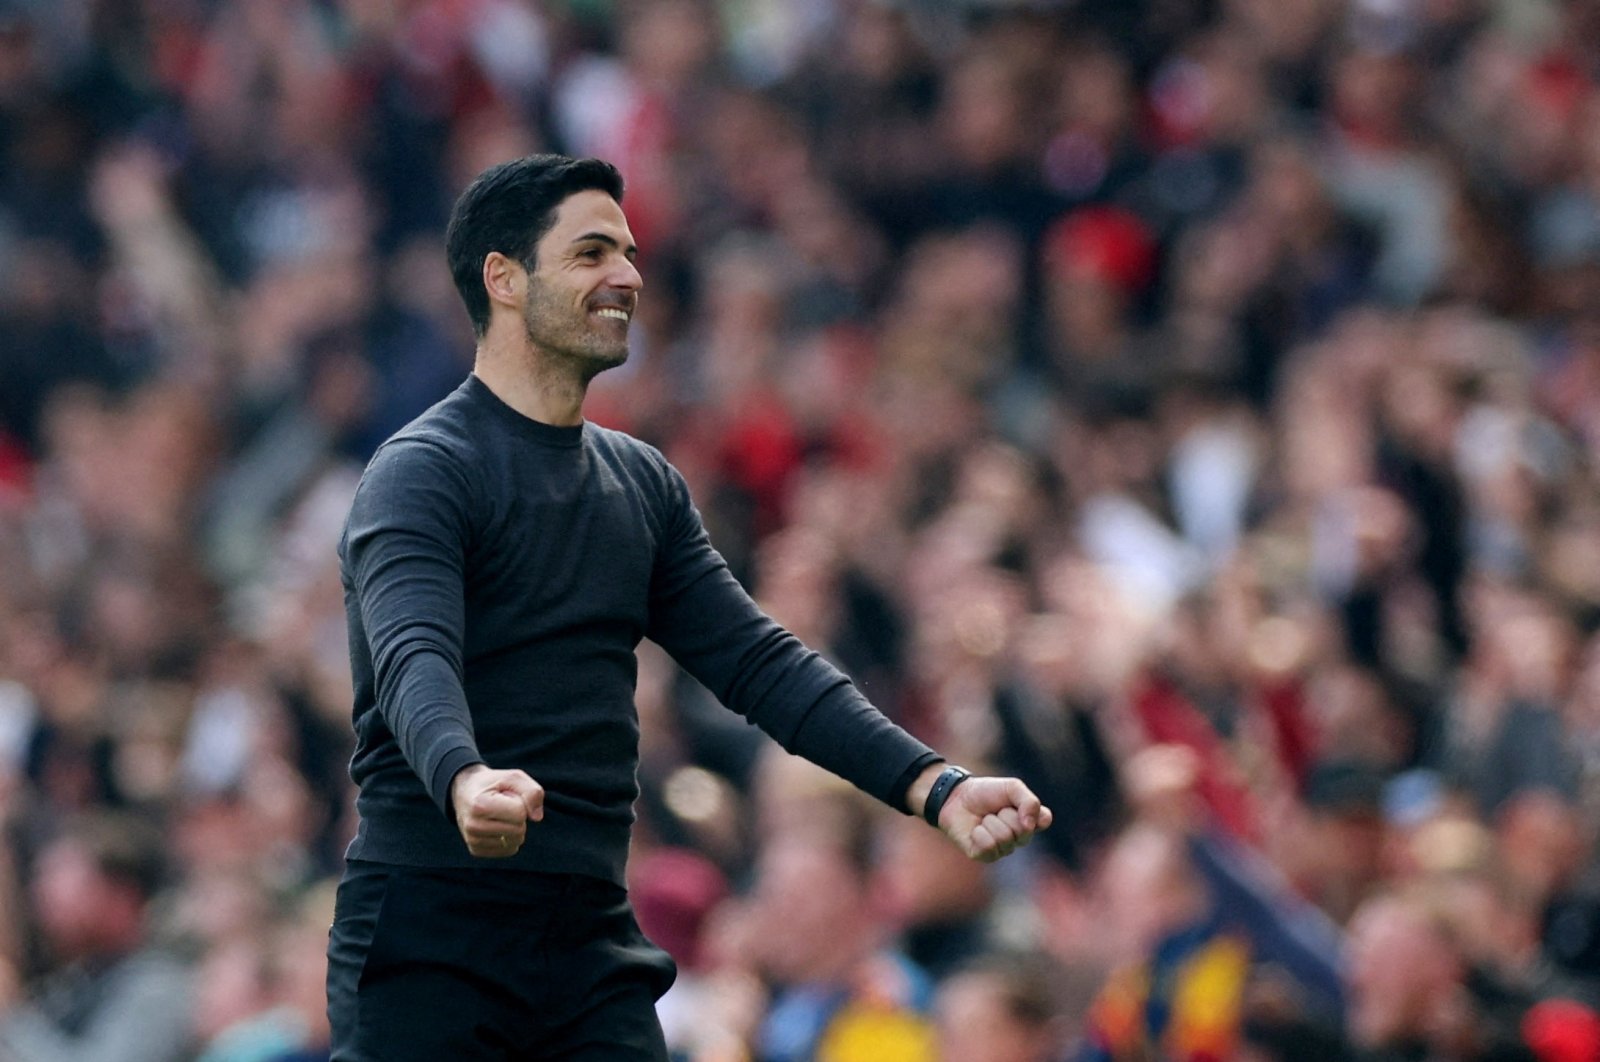 Mikel Arteta celebrates after the match against Manchester United, in London, Britain, April 23, 2022. (REUTERS PHOTO)